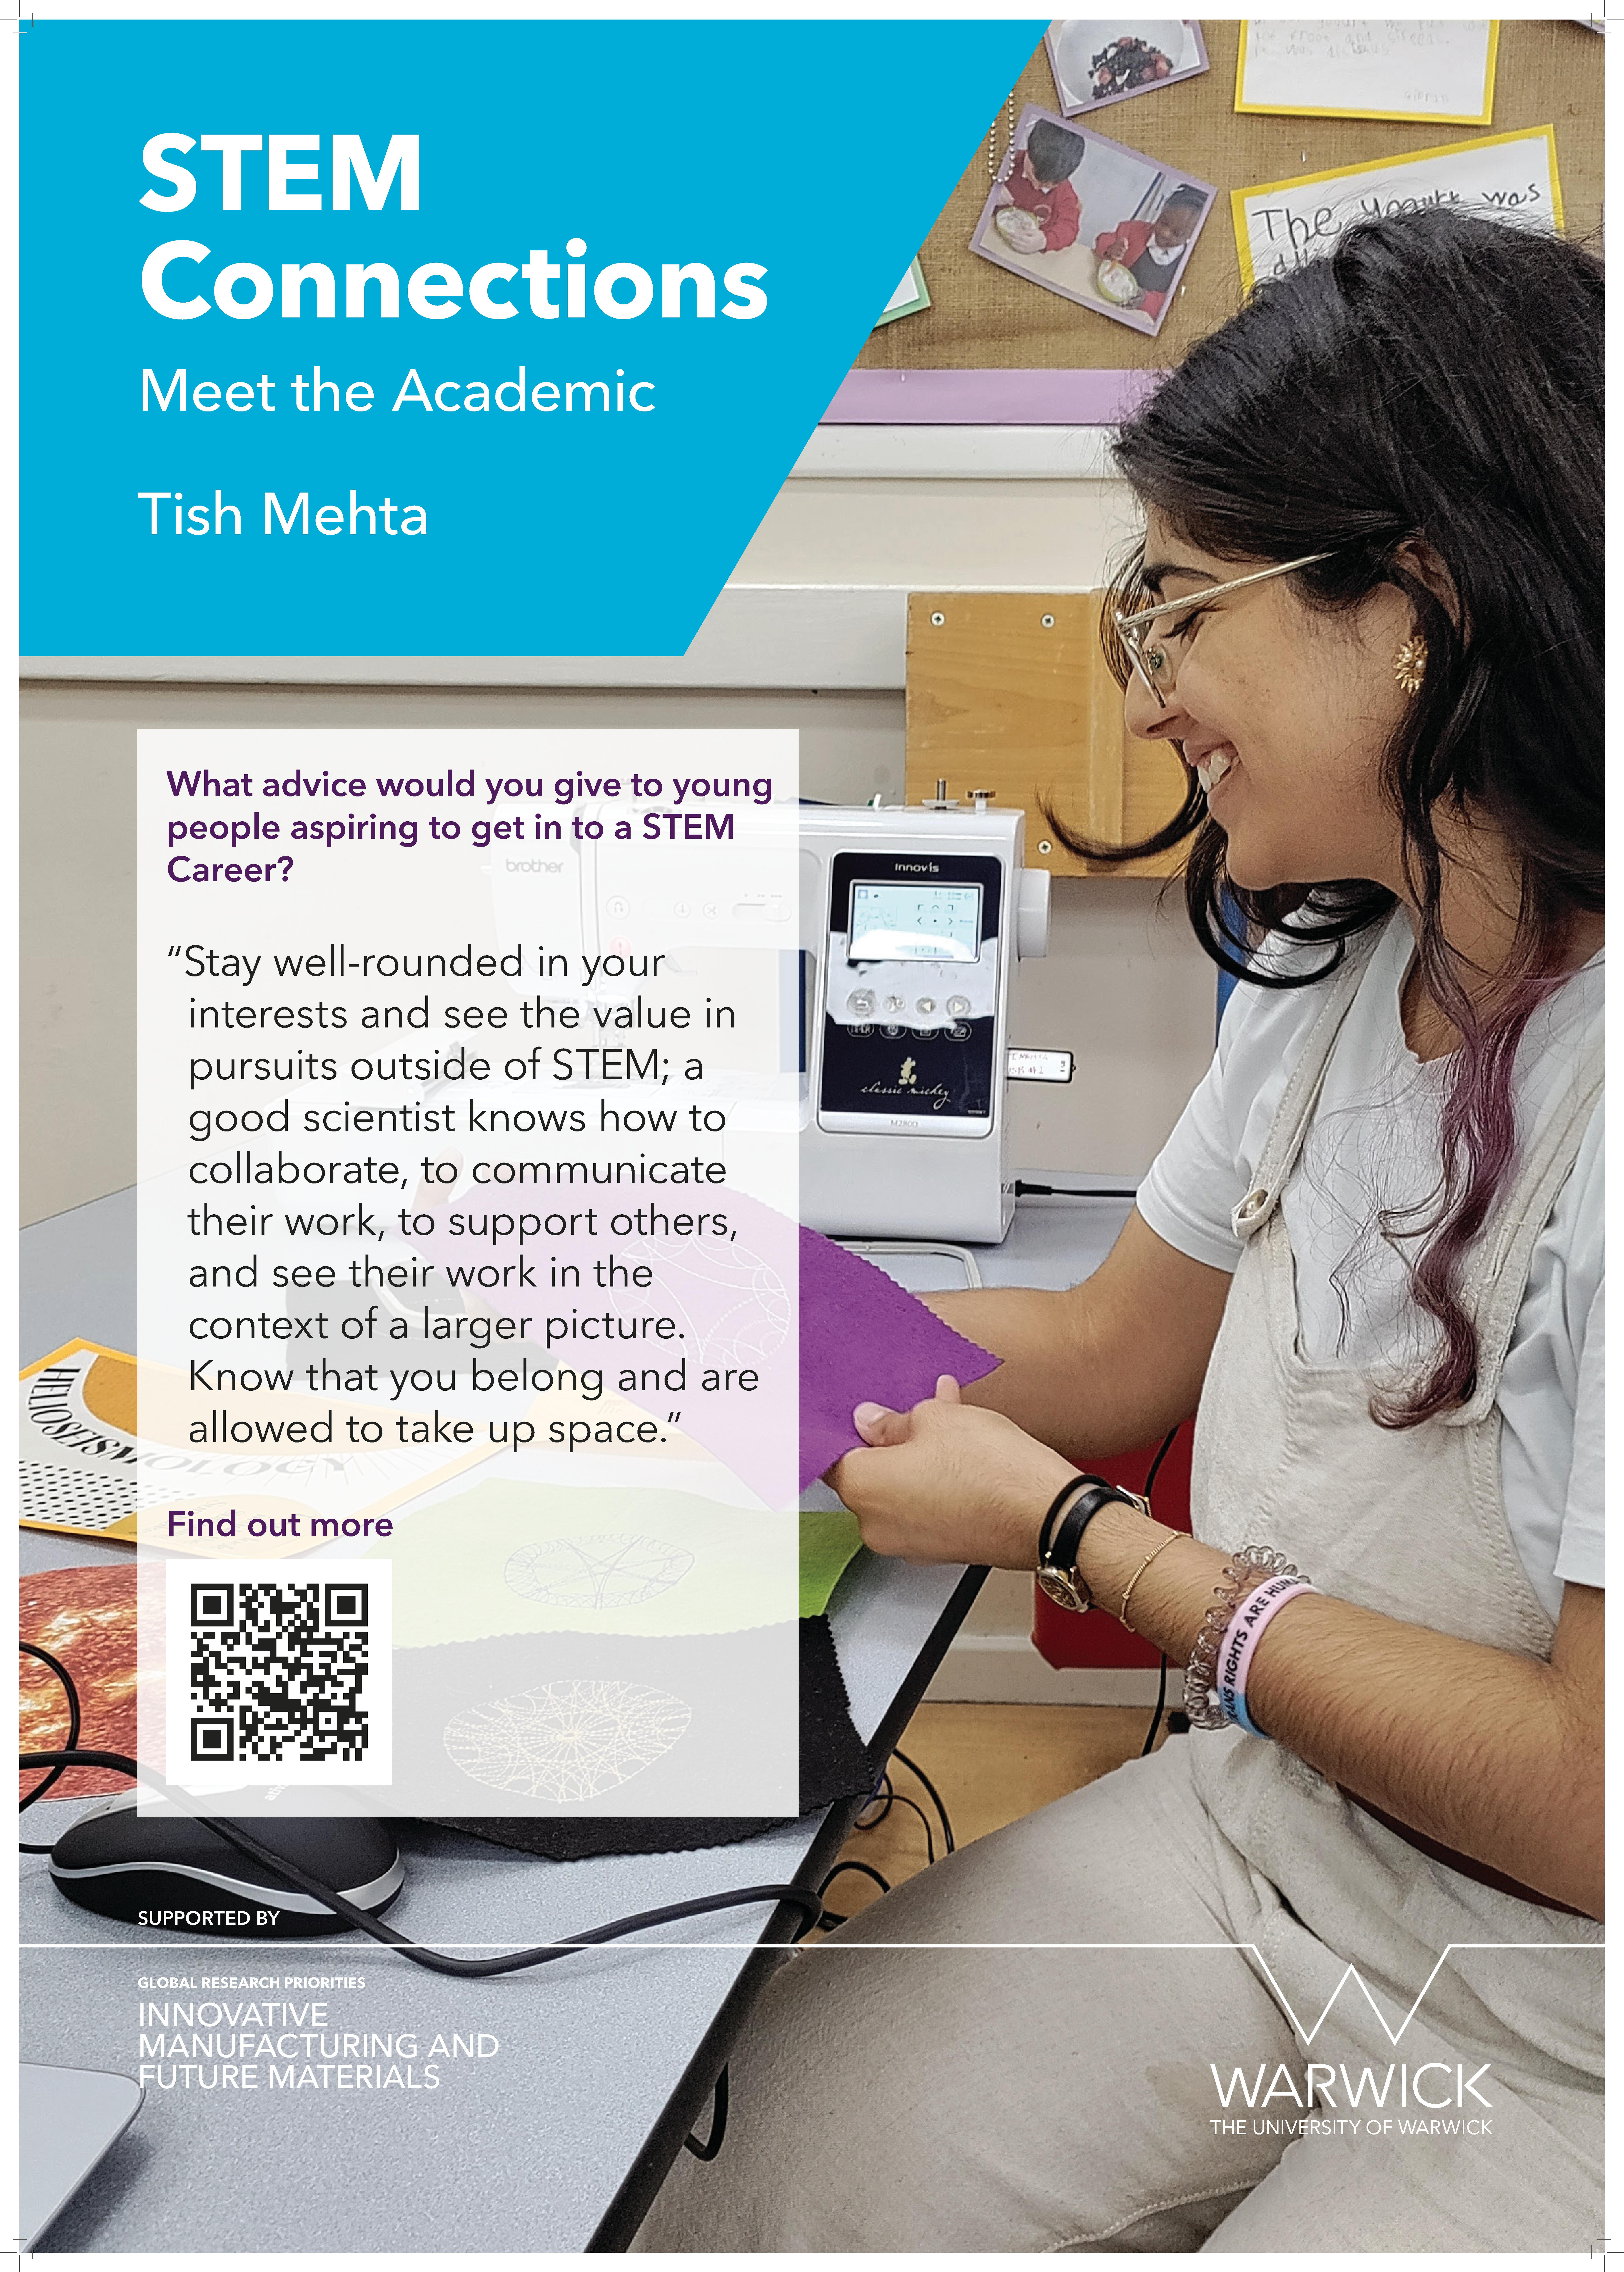 99878_stem_connections_posters_-_tish_mehta.jpg